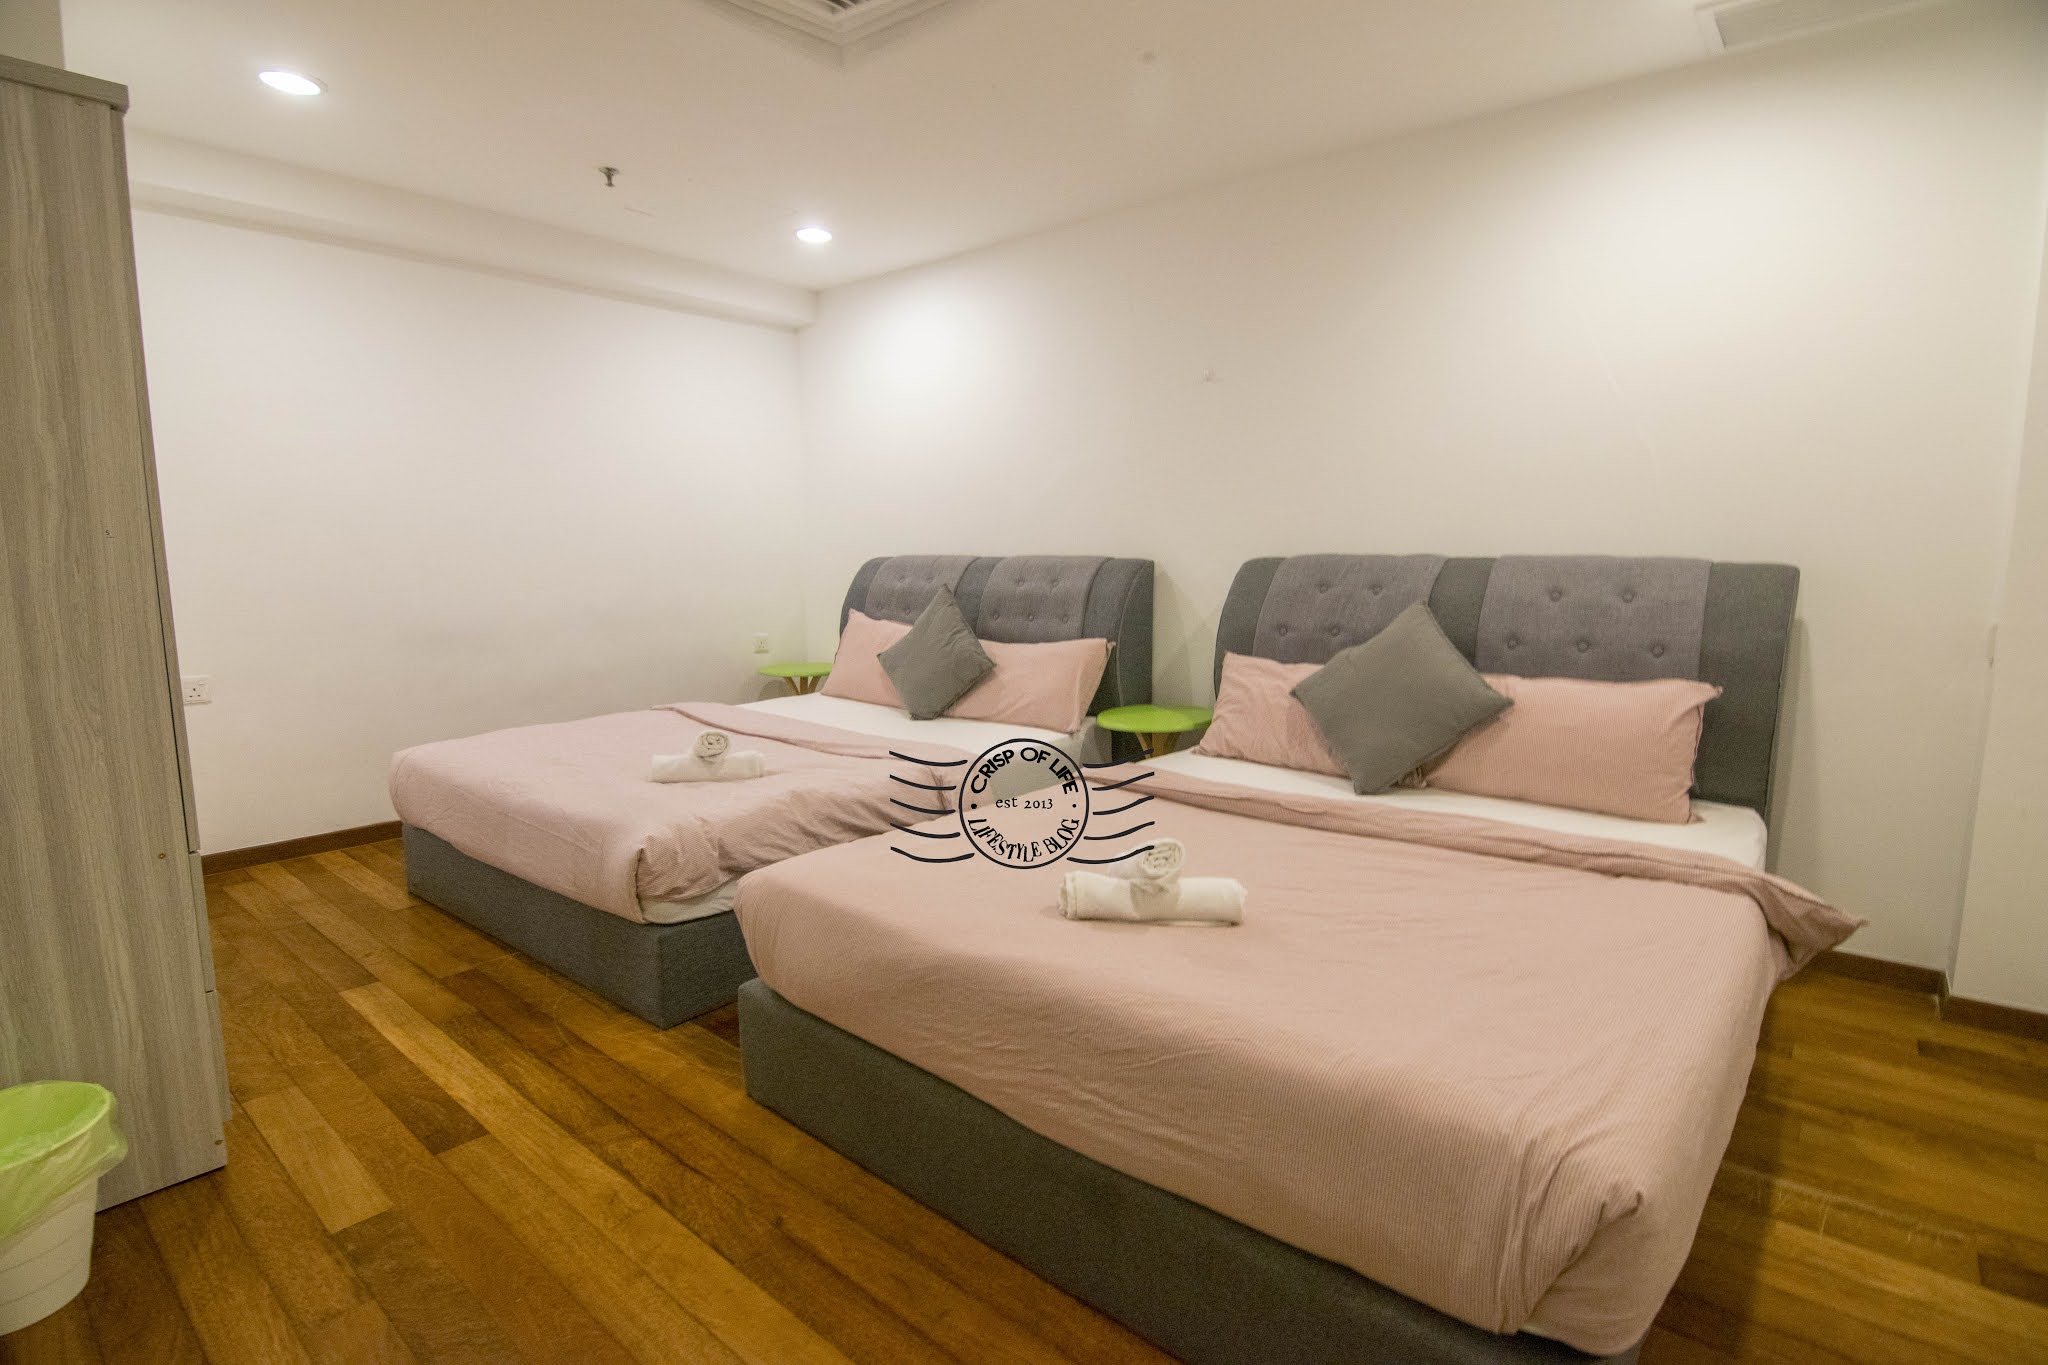 Raymond Homes - Best Homestay in Penang with Exclusive VIP Discount Benefits